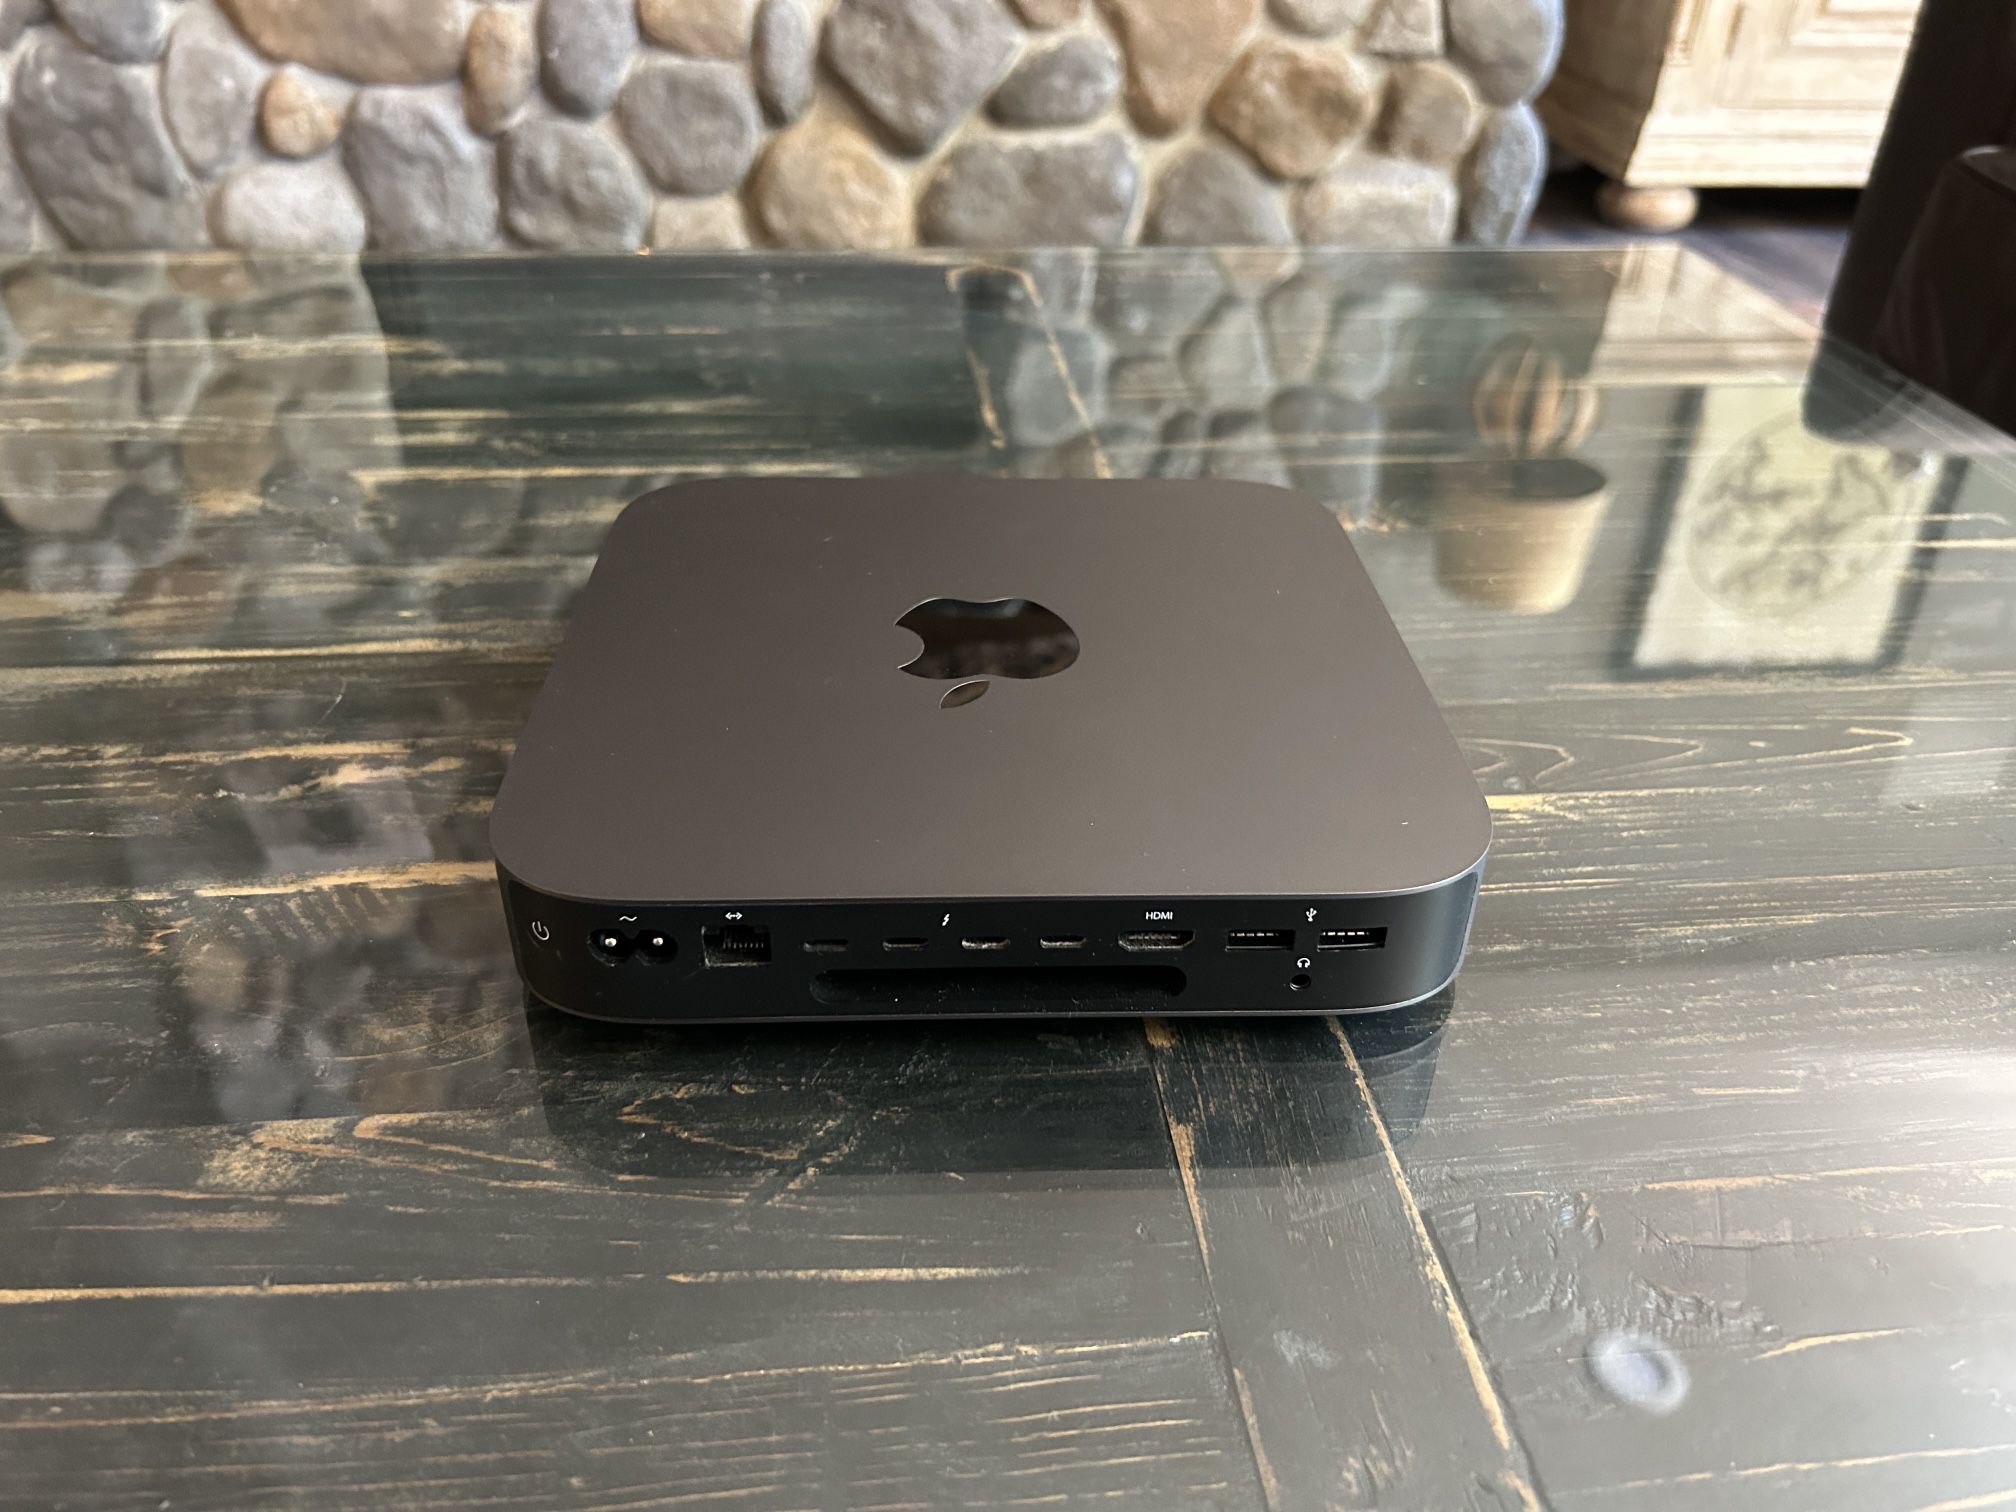 Apple Mac Mini 3.0 GHz 6-Core i5 256GB SSD 32GB 2666MHz RAM 2018 A1993 for  Sale in Vancouver, WA - OfferUp